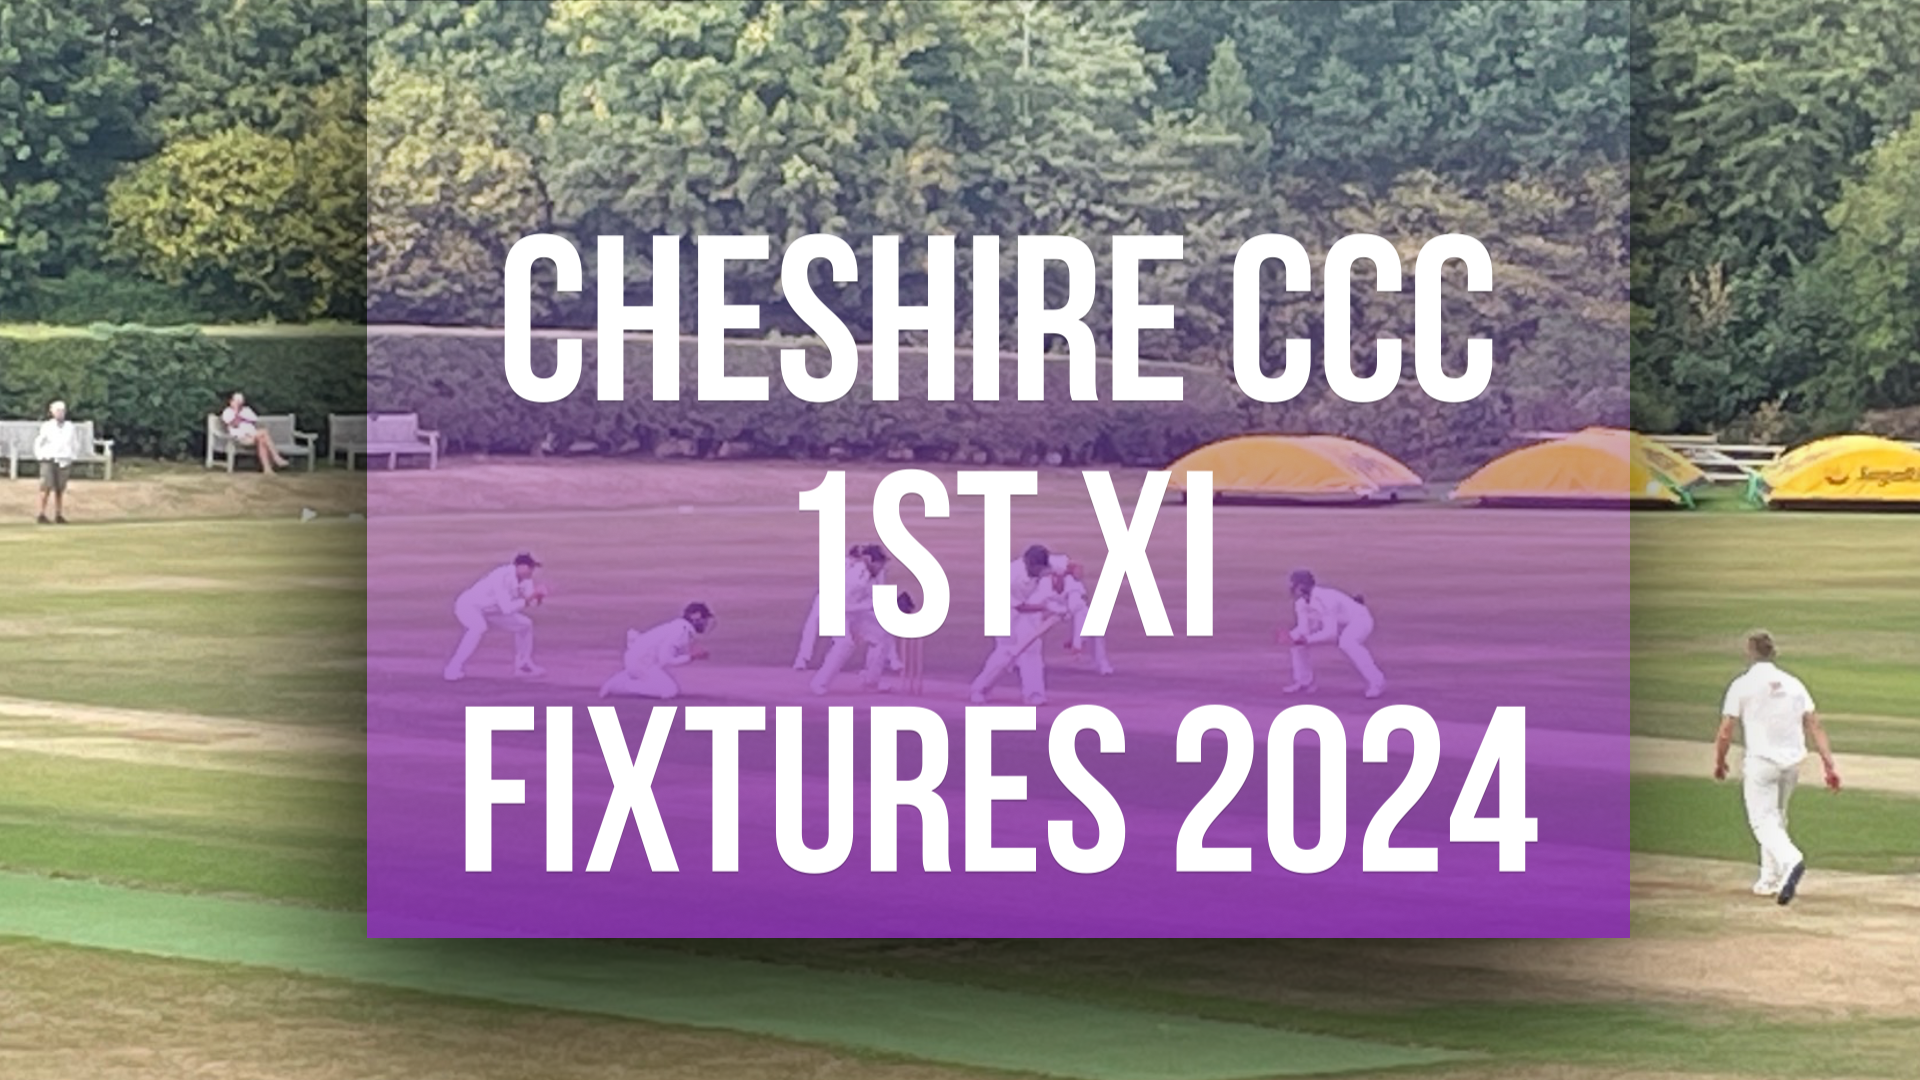 Cheshire CCC 1st XI Fixtures 2024